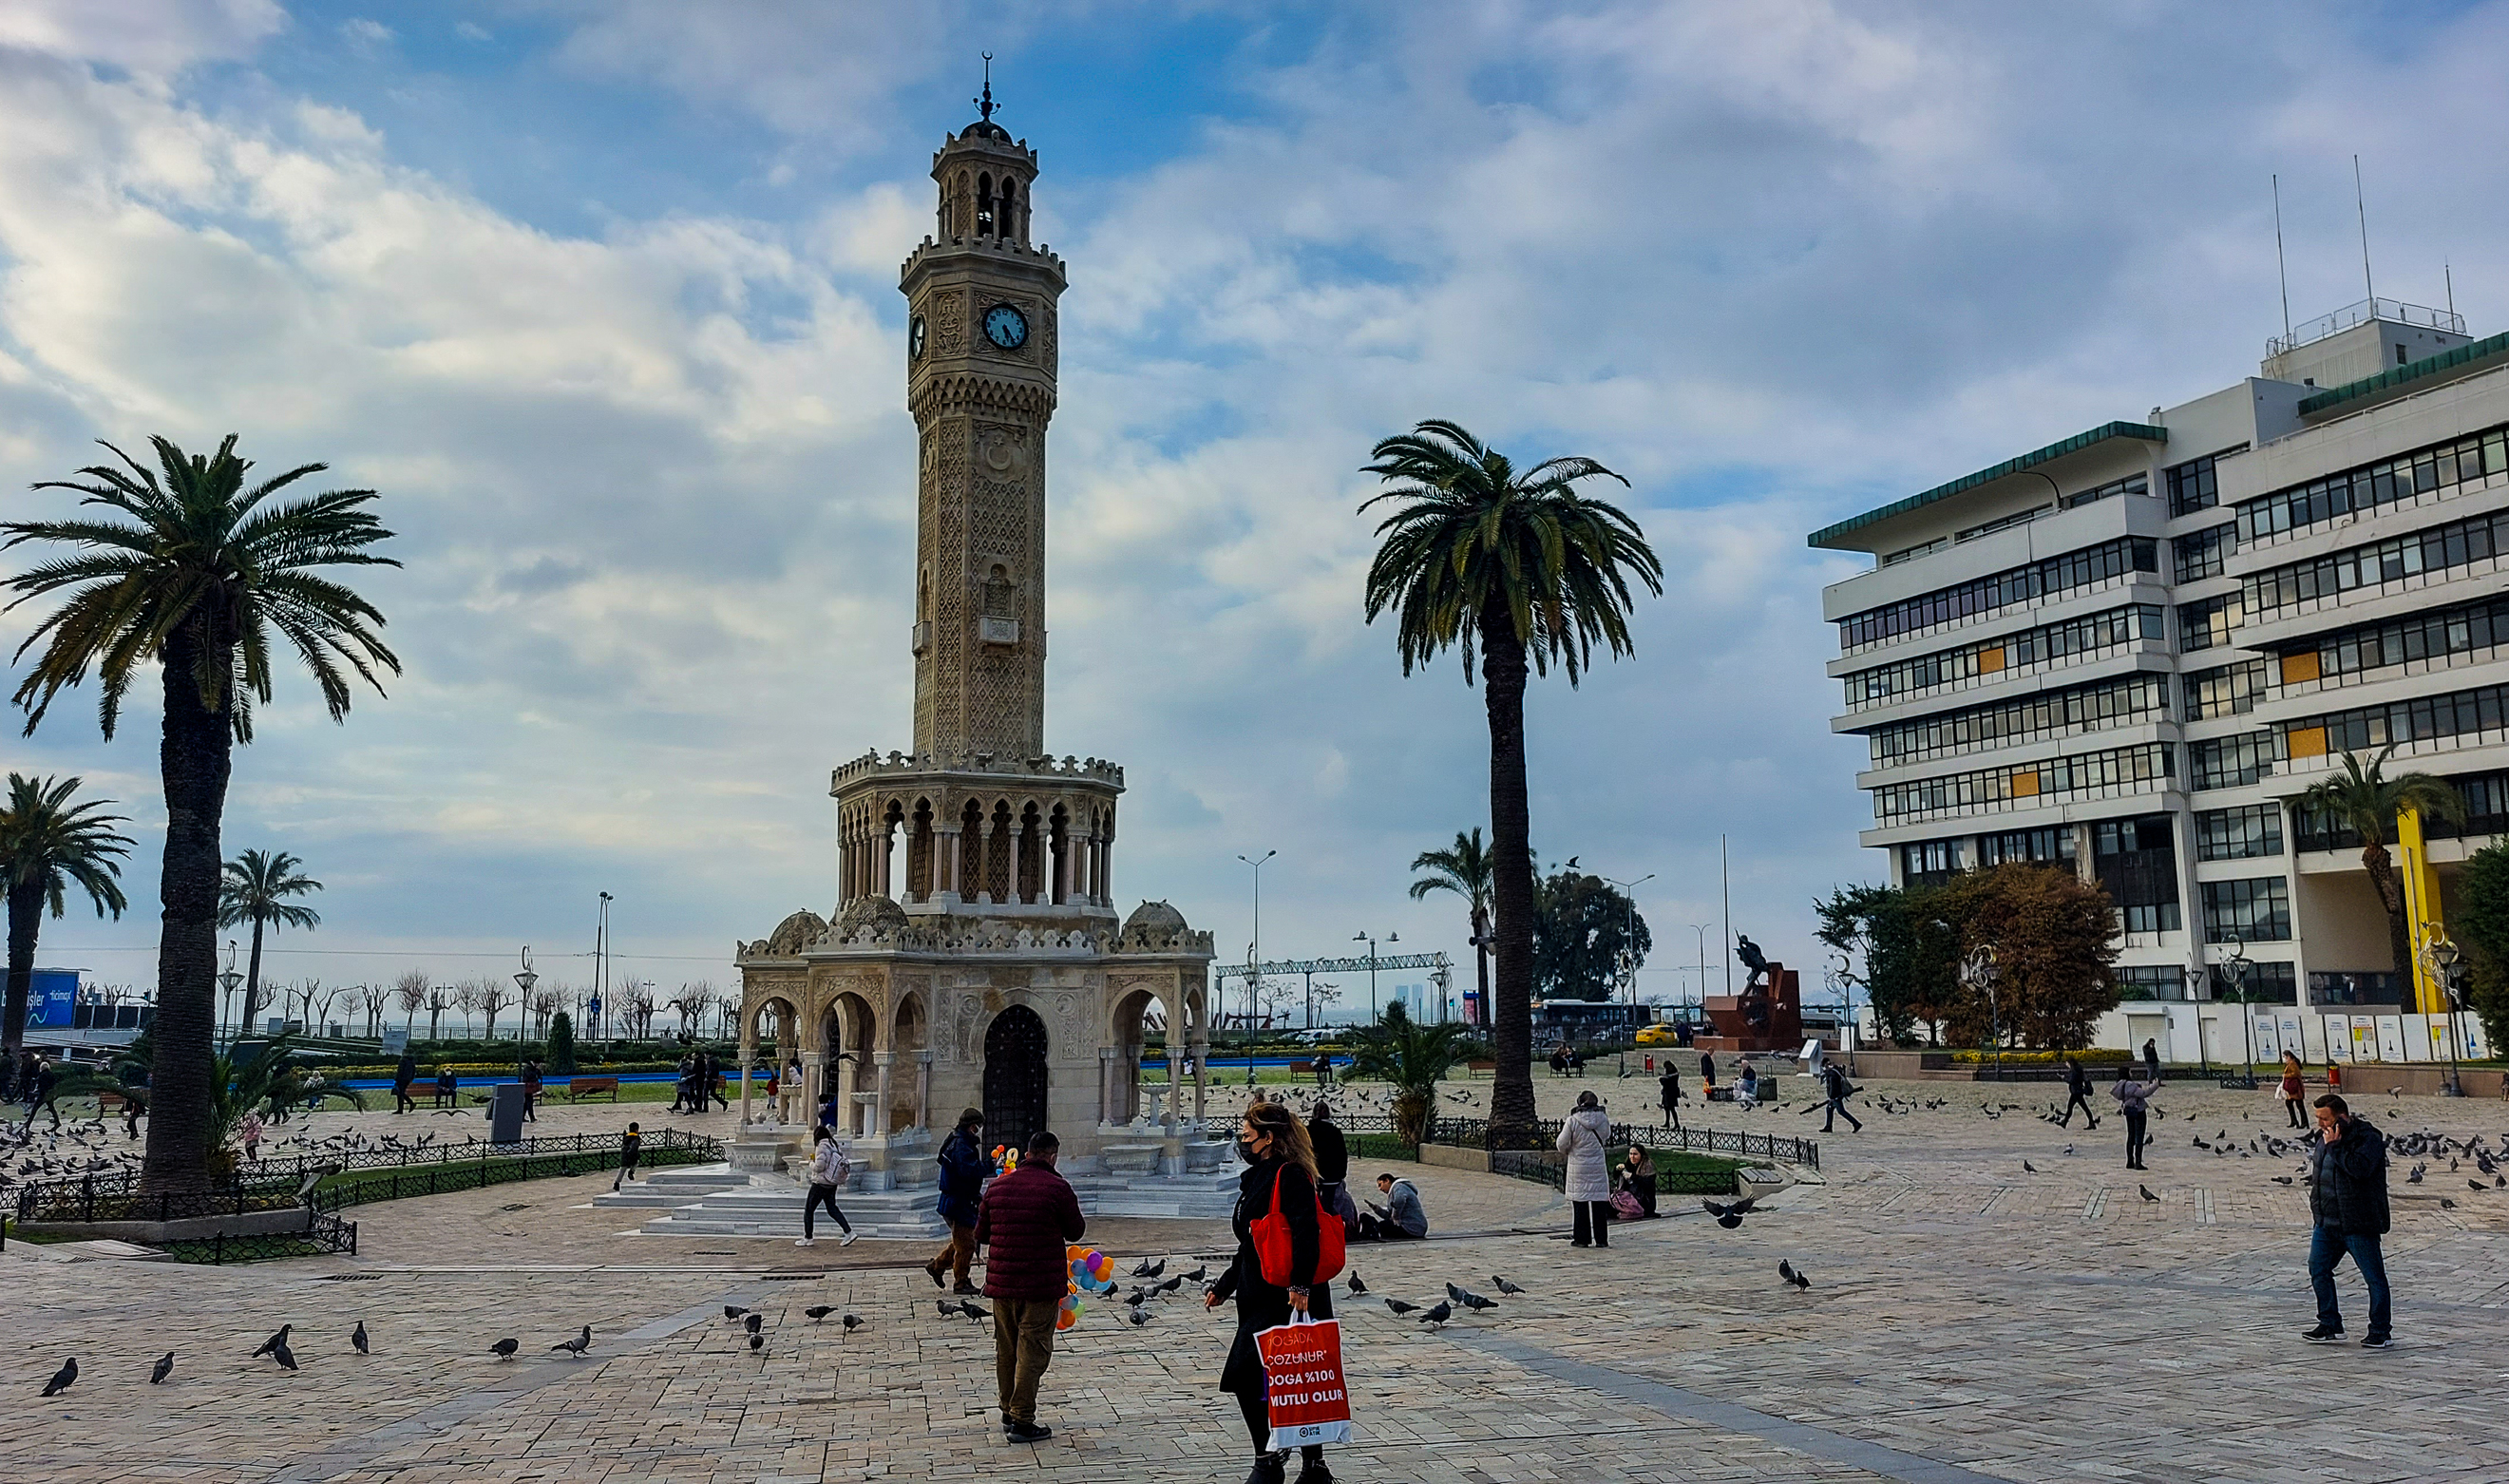 <span  class="uc_style_uc_tiles_grid_image_elementor_uc_items_attribute_title" style="color:#FFFFFF;">Clock Tower of Izmir</span>